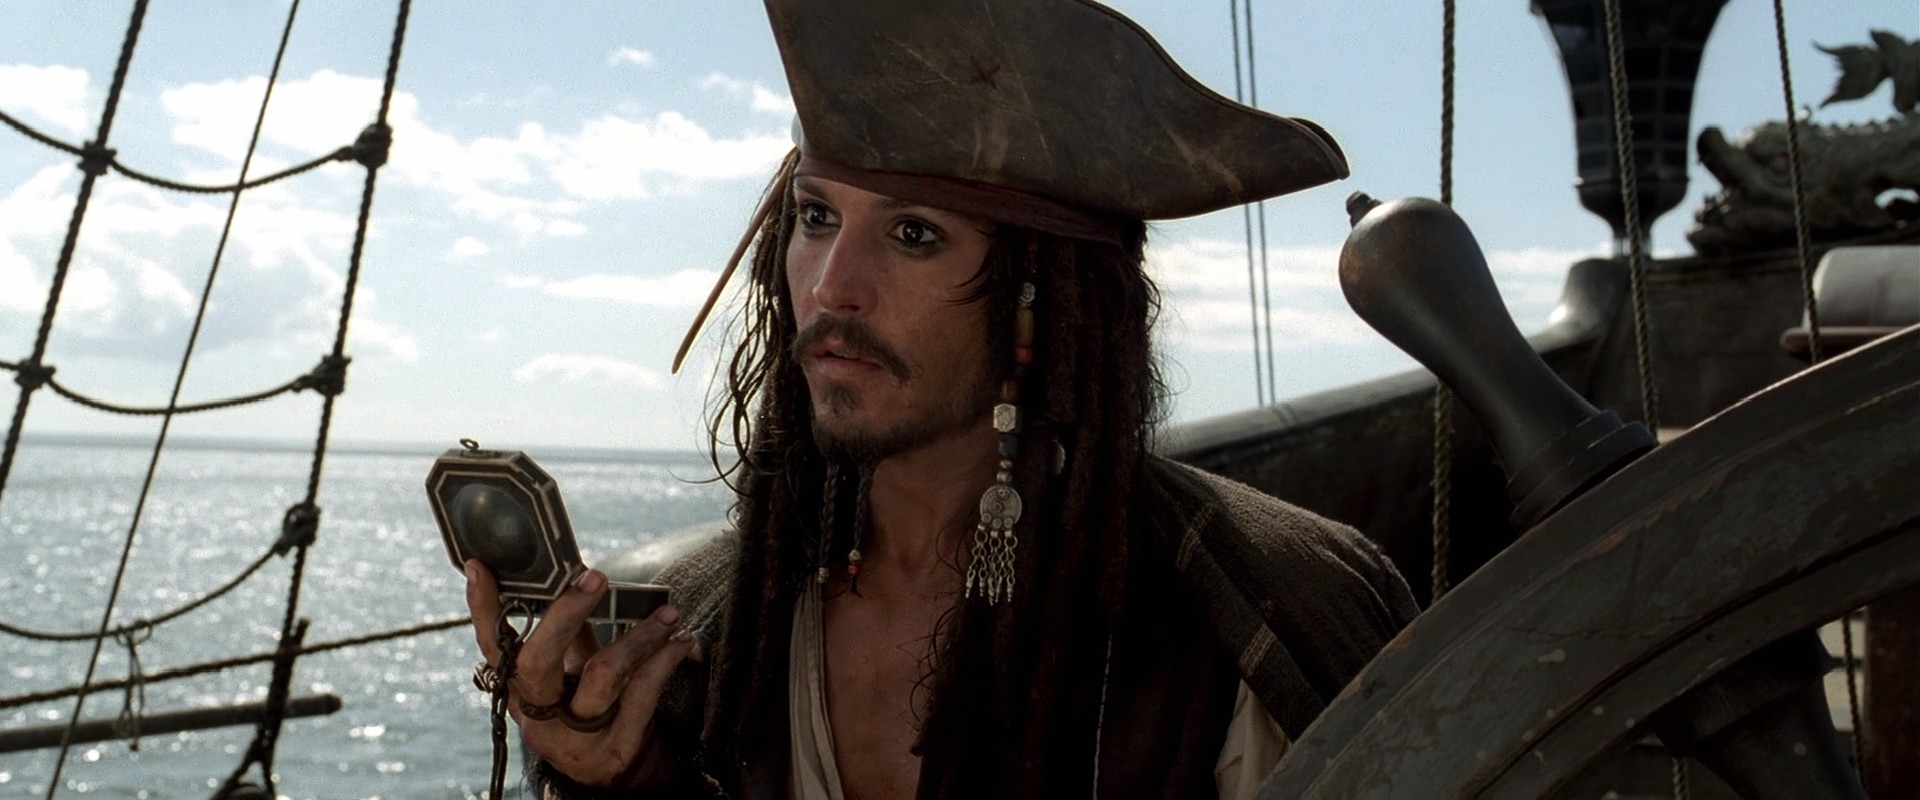 Curse-Of-The-Black-Pearl-pirates-of-the-caribbean-31445280-1920-800.jpg